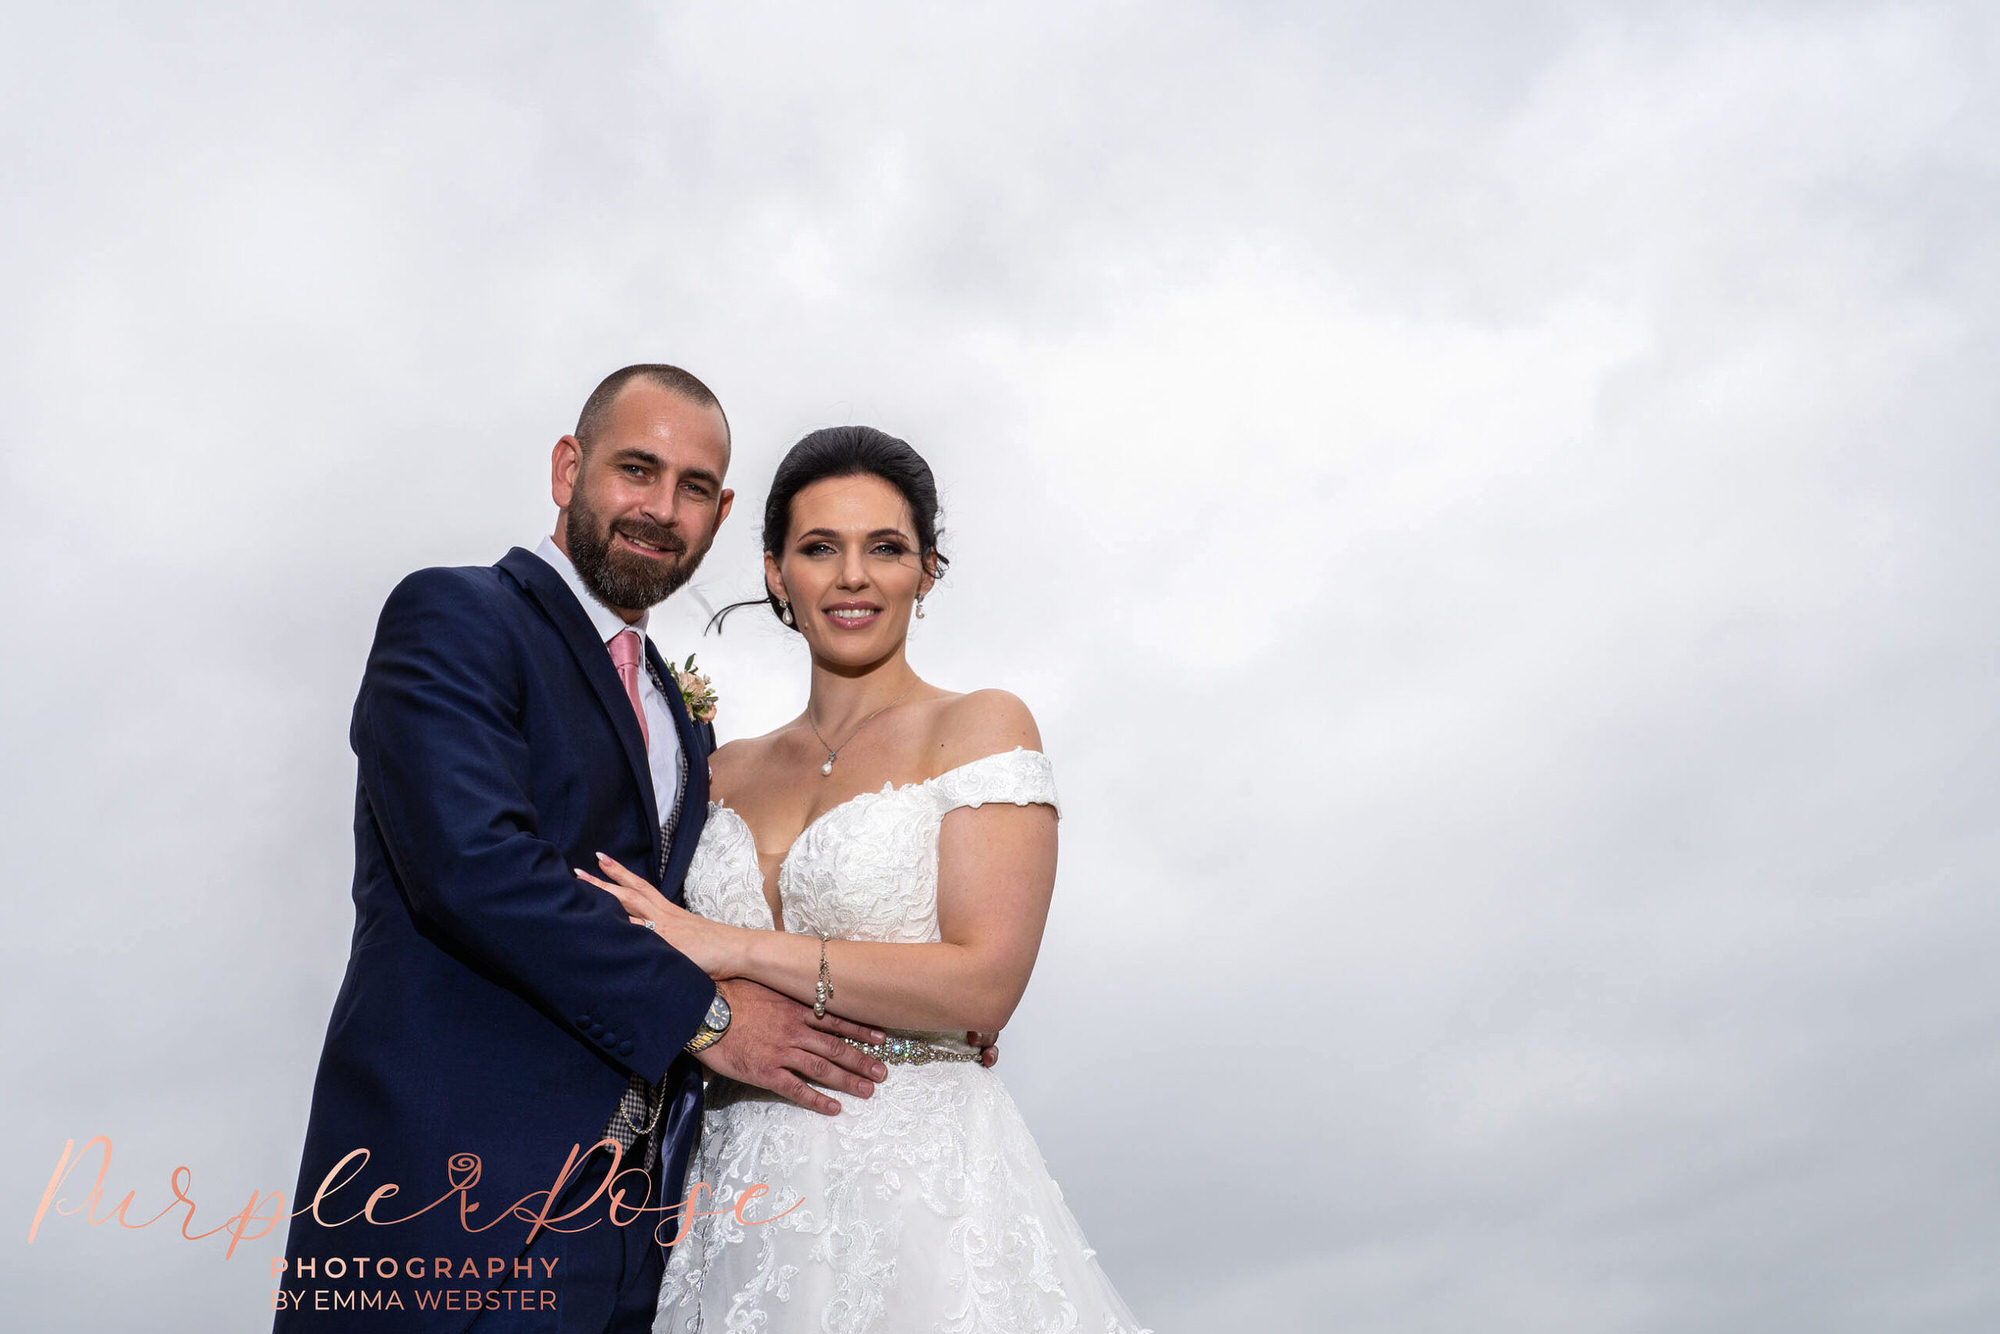 Bride and groom stood in front of a cloudy sky